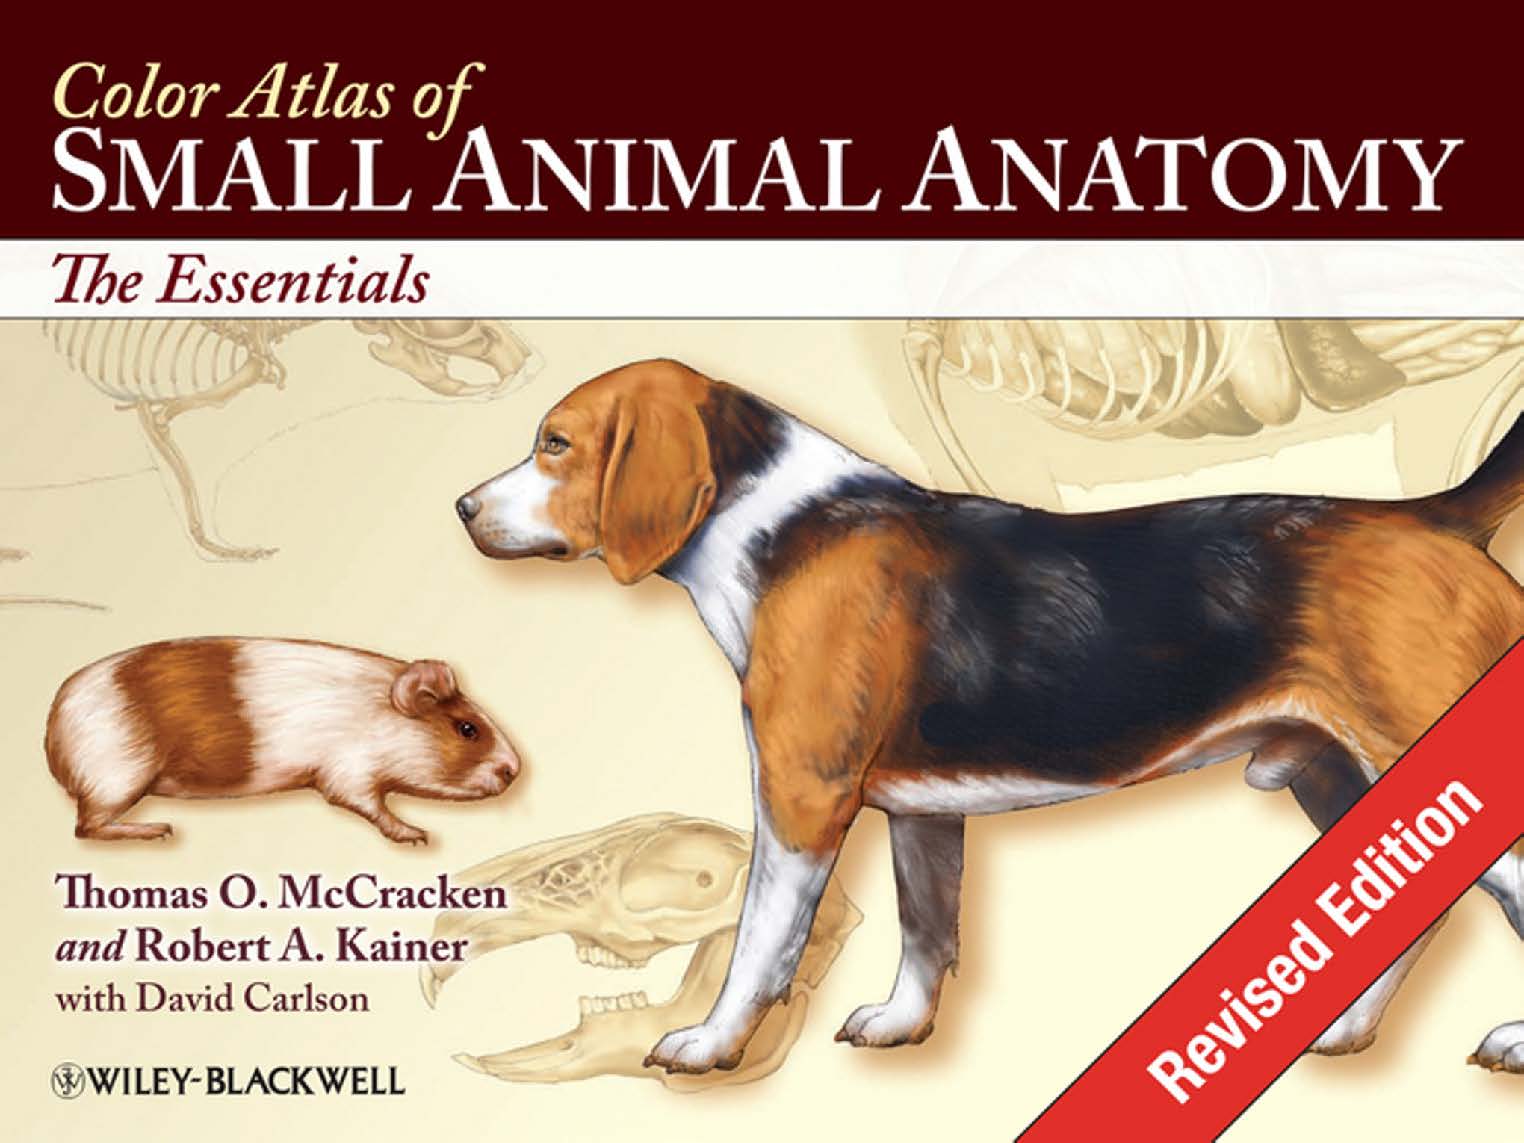 Color Atlas of Small Animal Anatomy: The Essentials, Revised Edition |  VetBooks